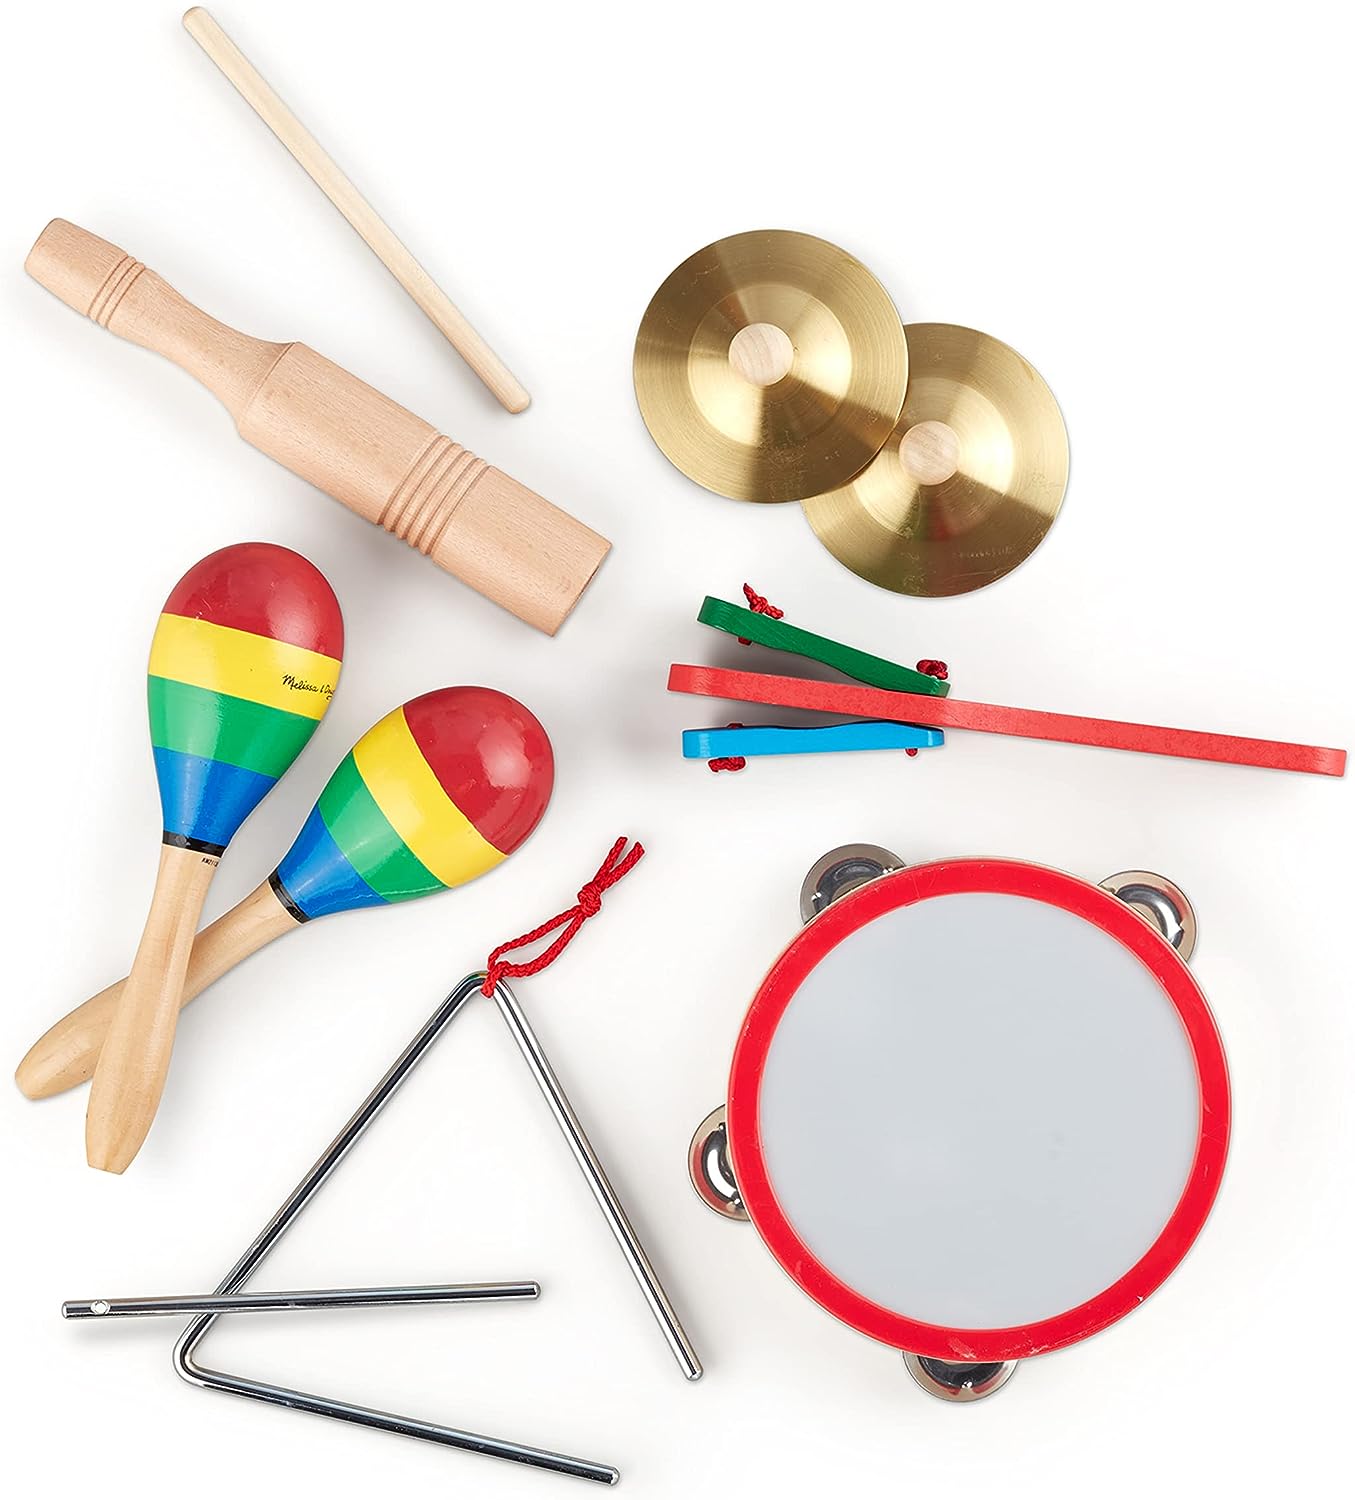 Melissa Doug Band-in-a-Box Clap! Clang! Tap! - 10-Piece Musical Instrument Set - Kids Musical Instruments, Wooden Percussion Instruments For Toddlers And Kids Ages 3+